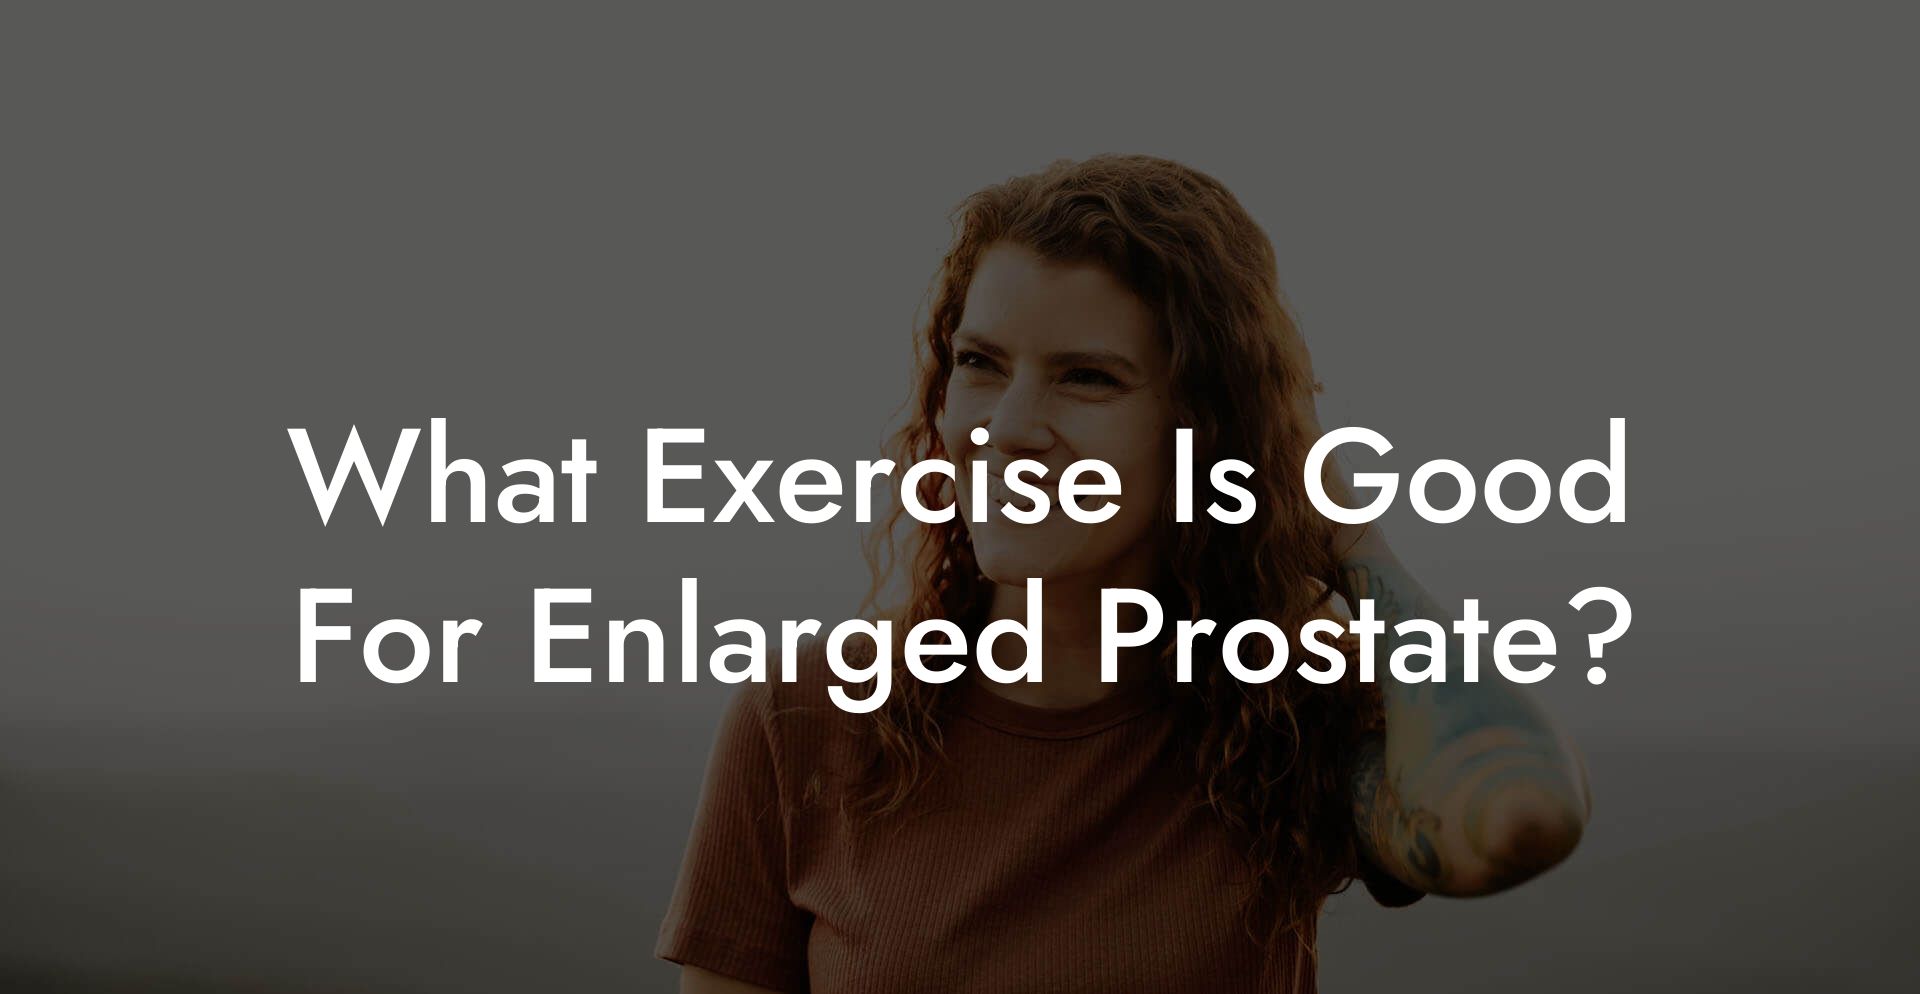 What Exercise Is Good For Enlarged Prostate?